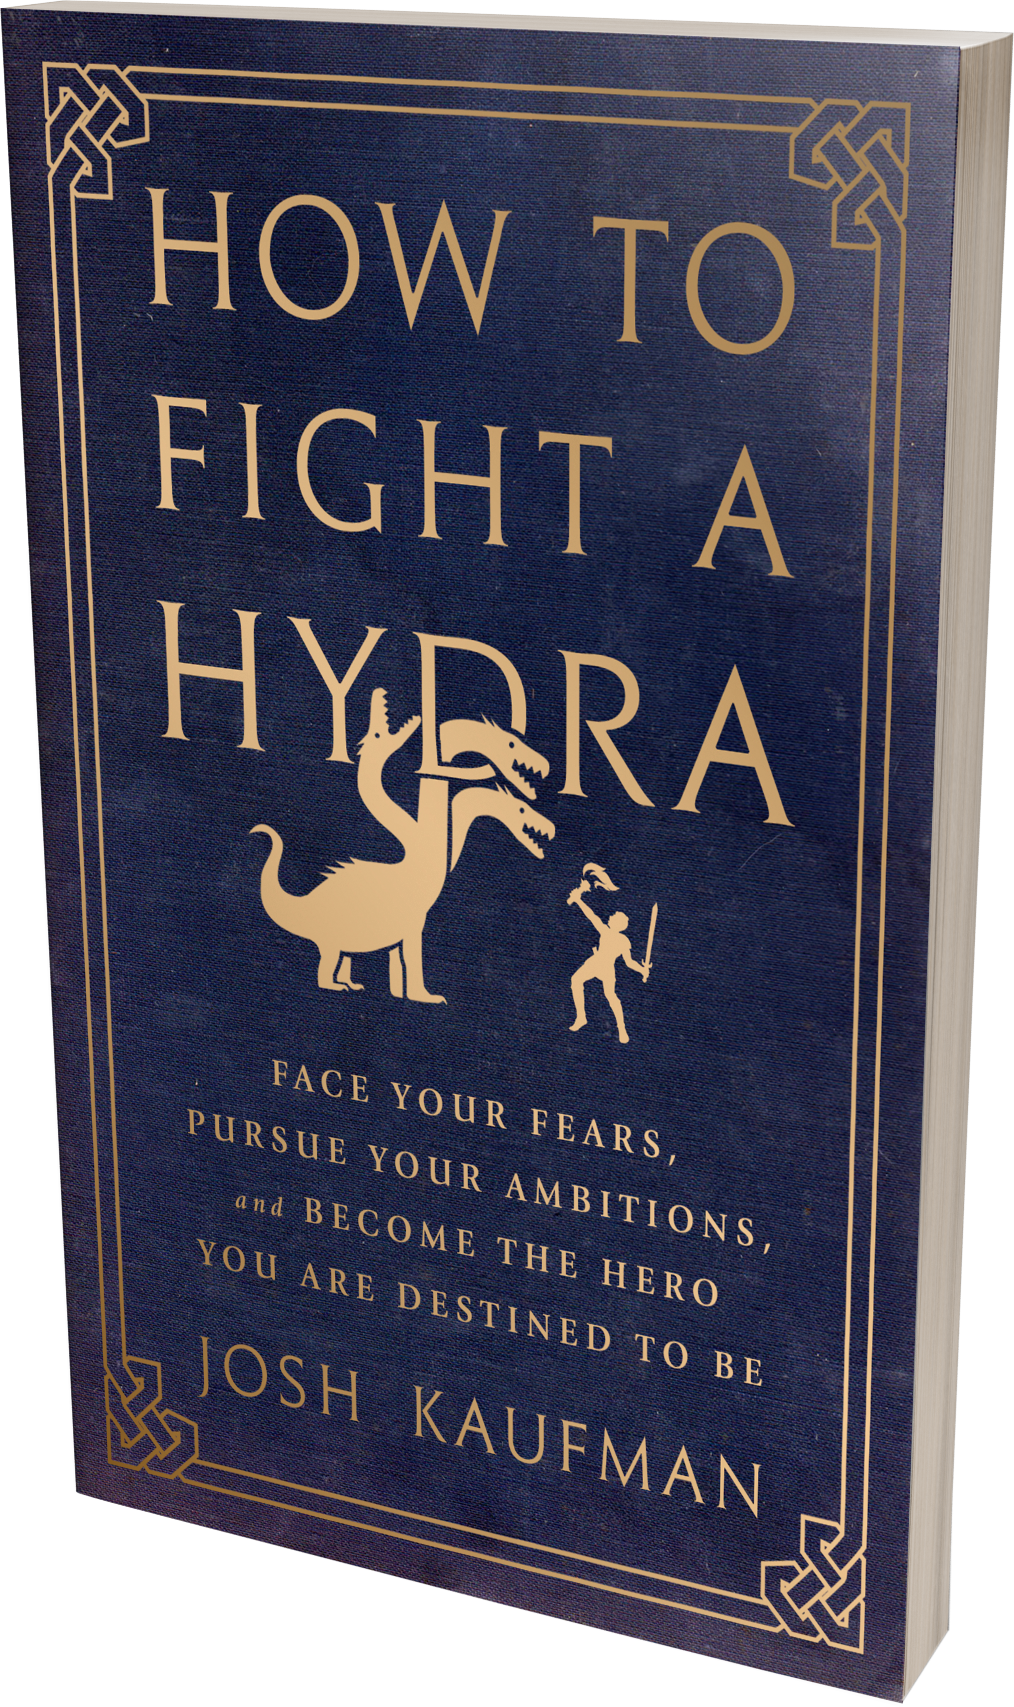 How to Fight a Hydra